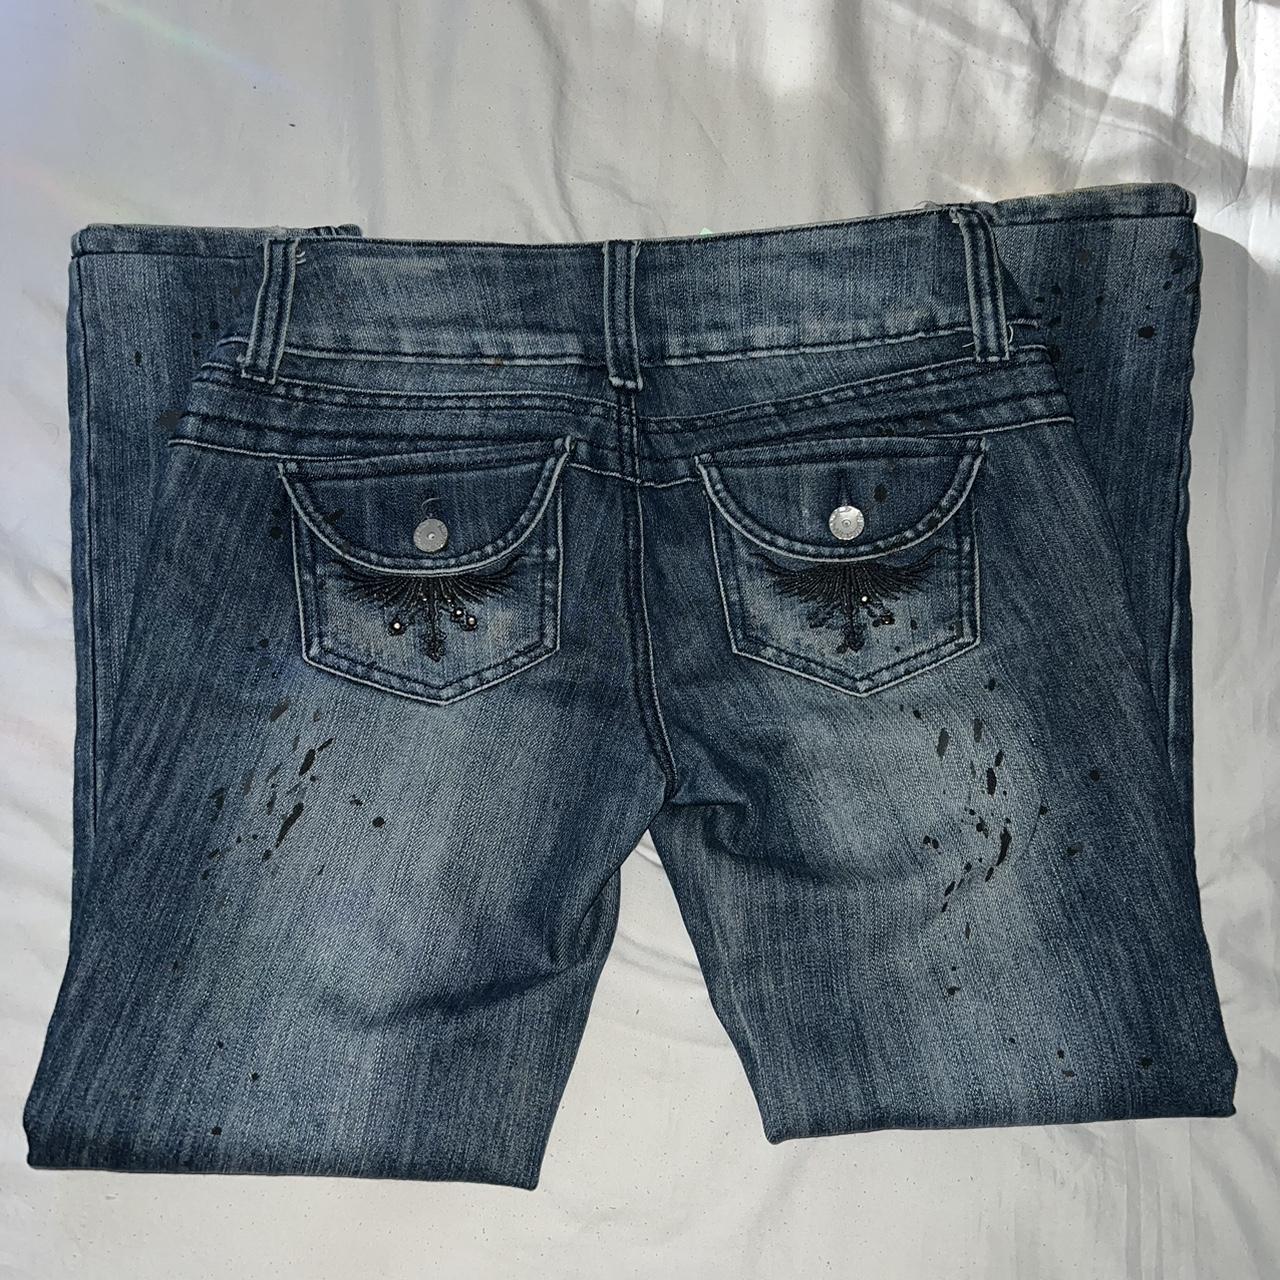 Vintage Y2k Bedazzled Lowrise Jeans Size 3 These... - Depop